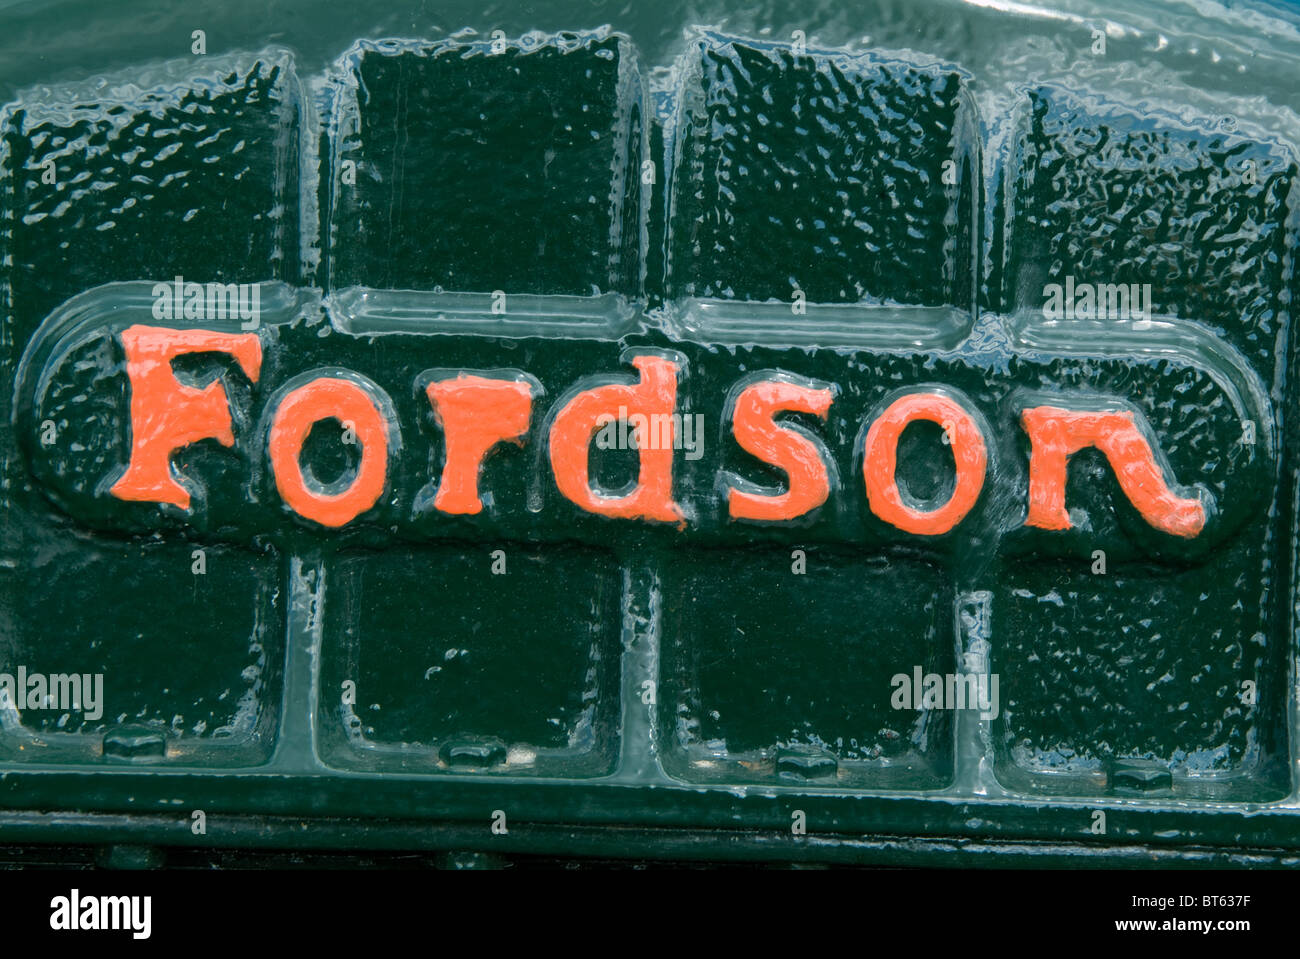 green fordson tractor logo name plate antique old collectible brand name mass produced ford farm machinery Stock Photo